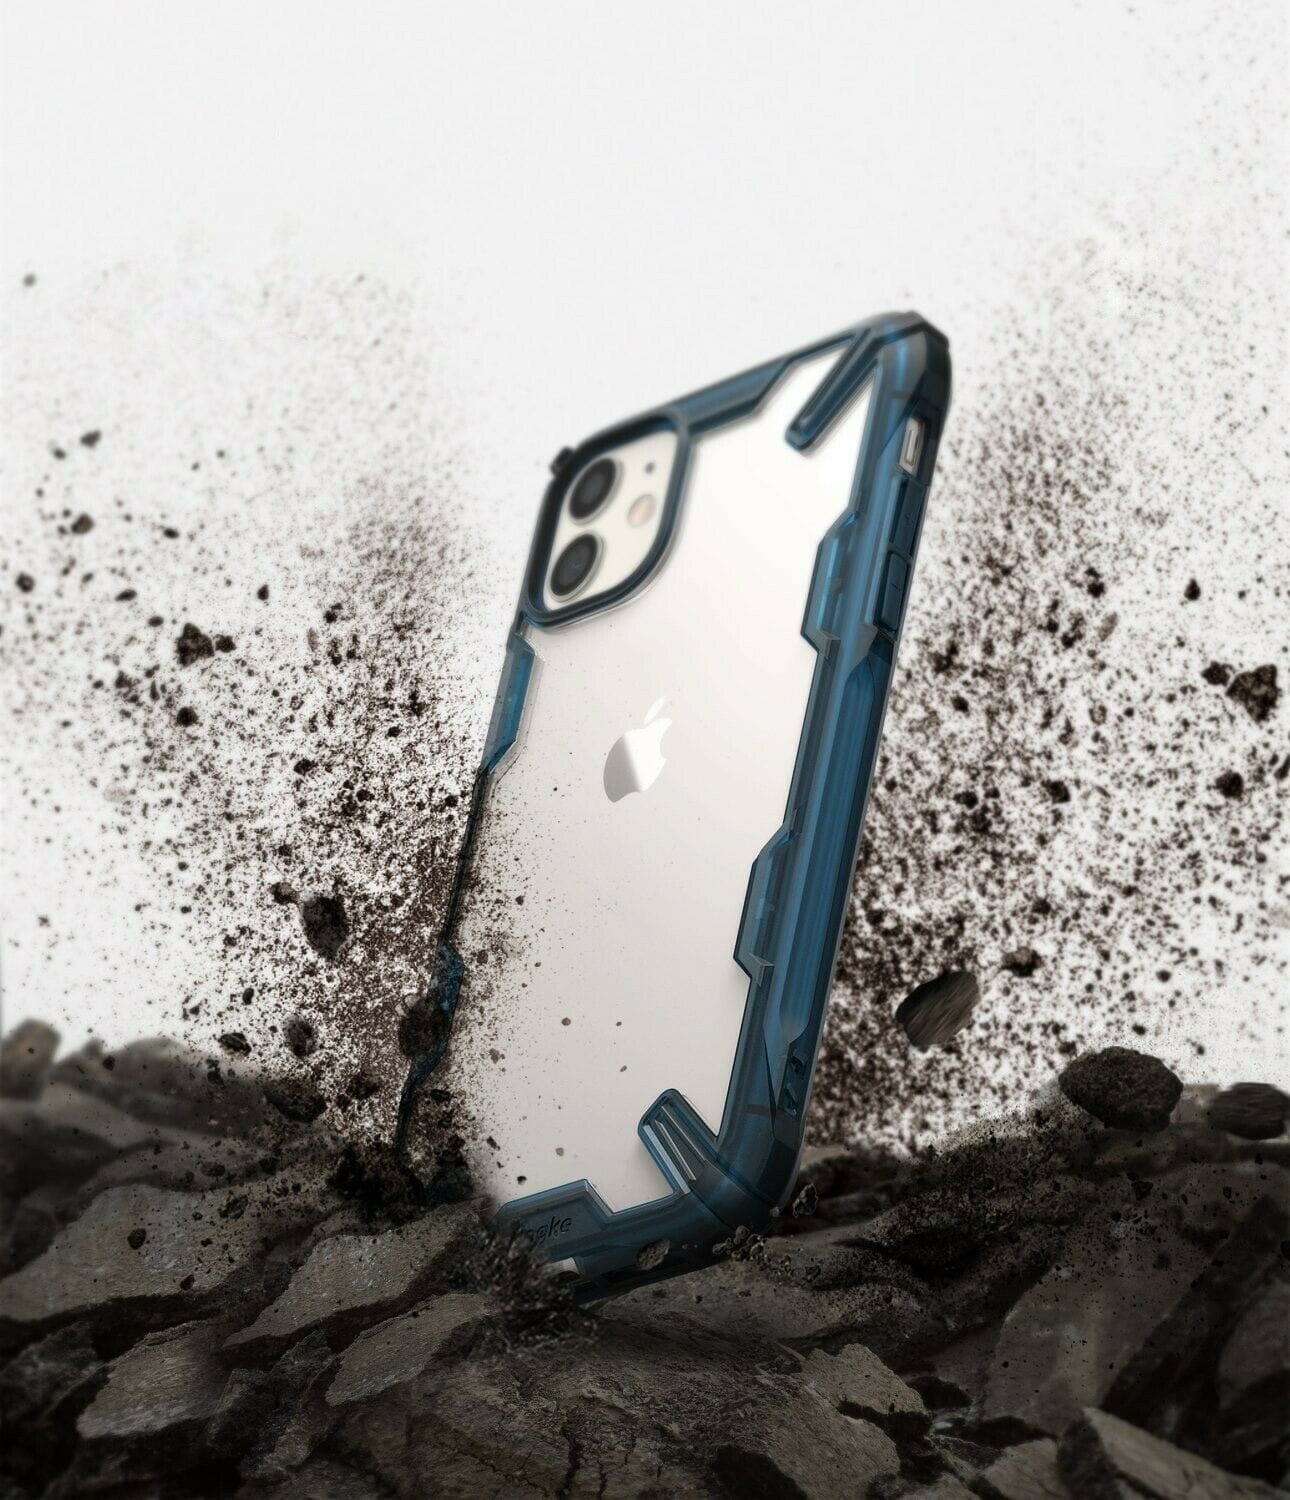 Rugged case shock absorbing and hard case for iPhone 11